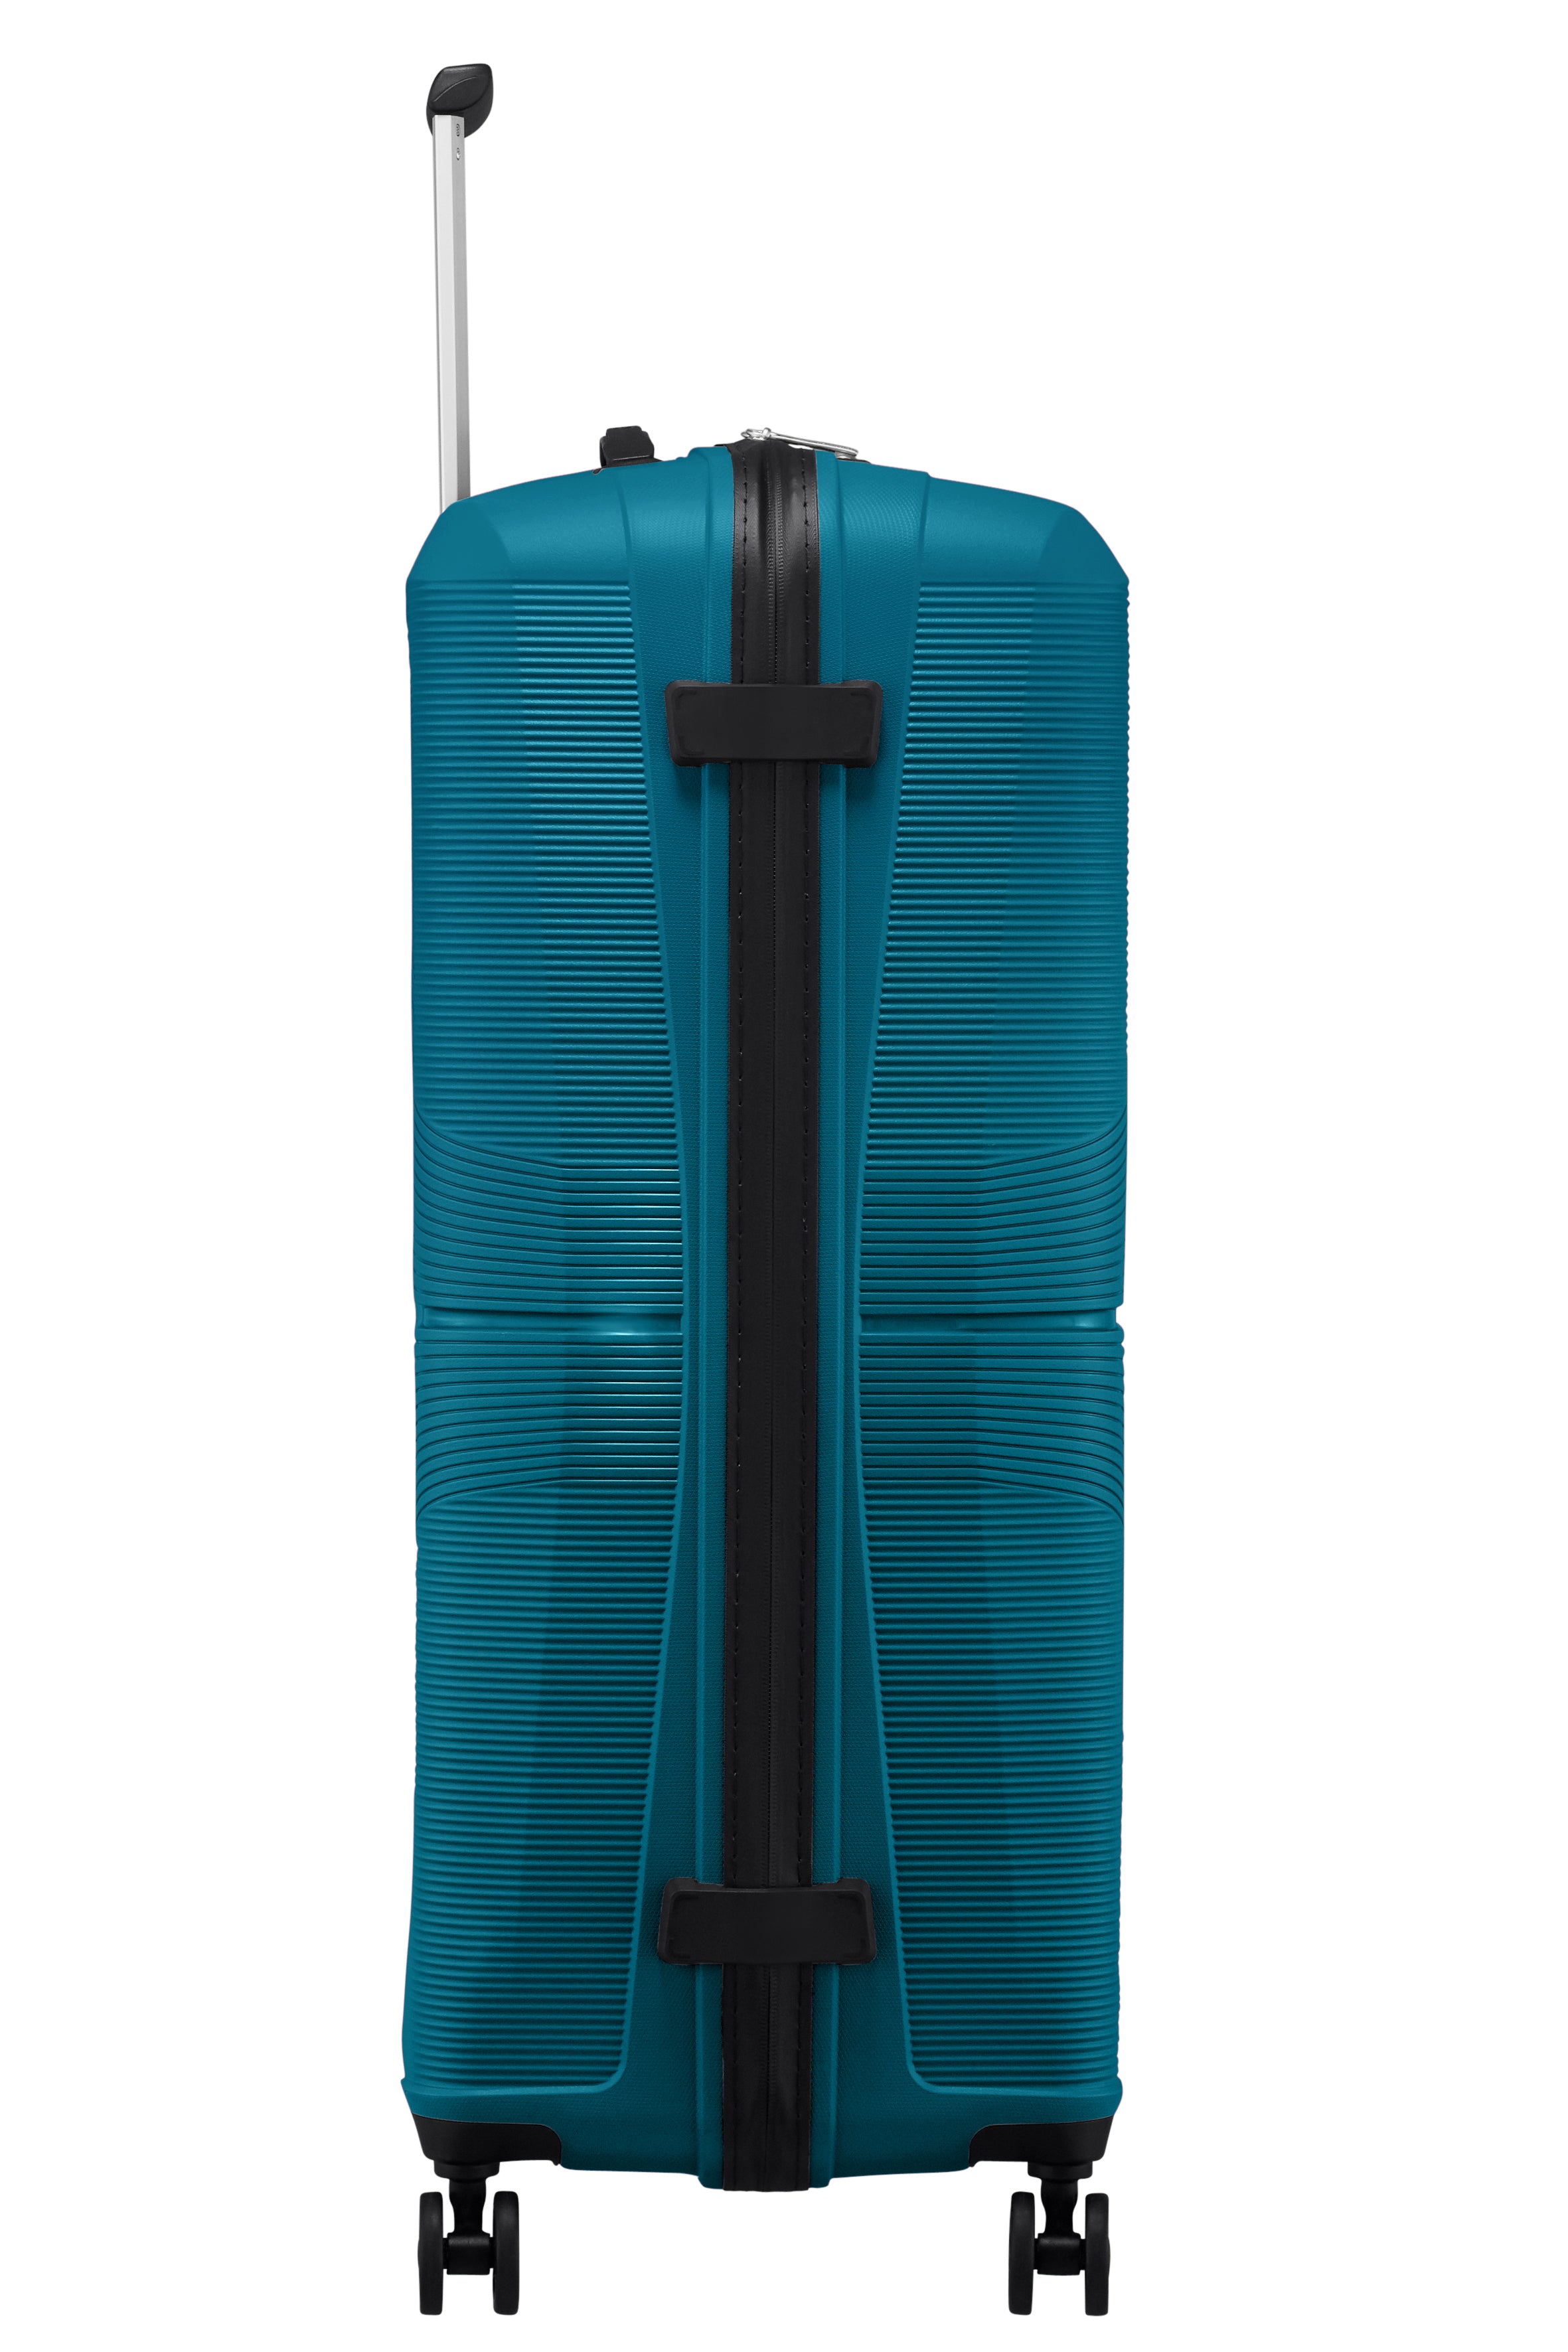 American Tourister - Airconic 77cm Large Suitcase - Deep Ocean-5